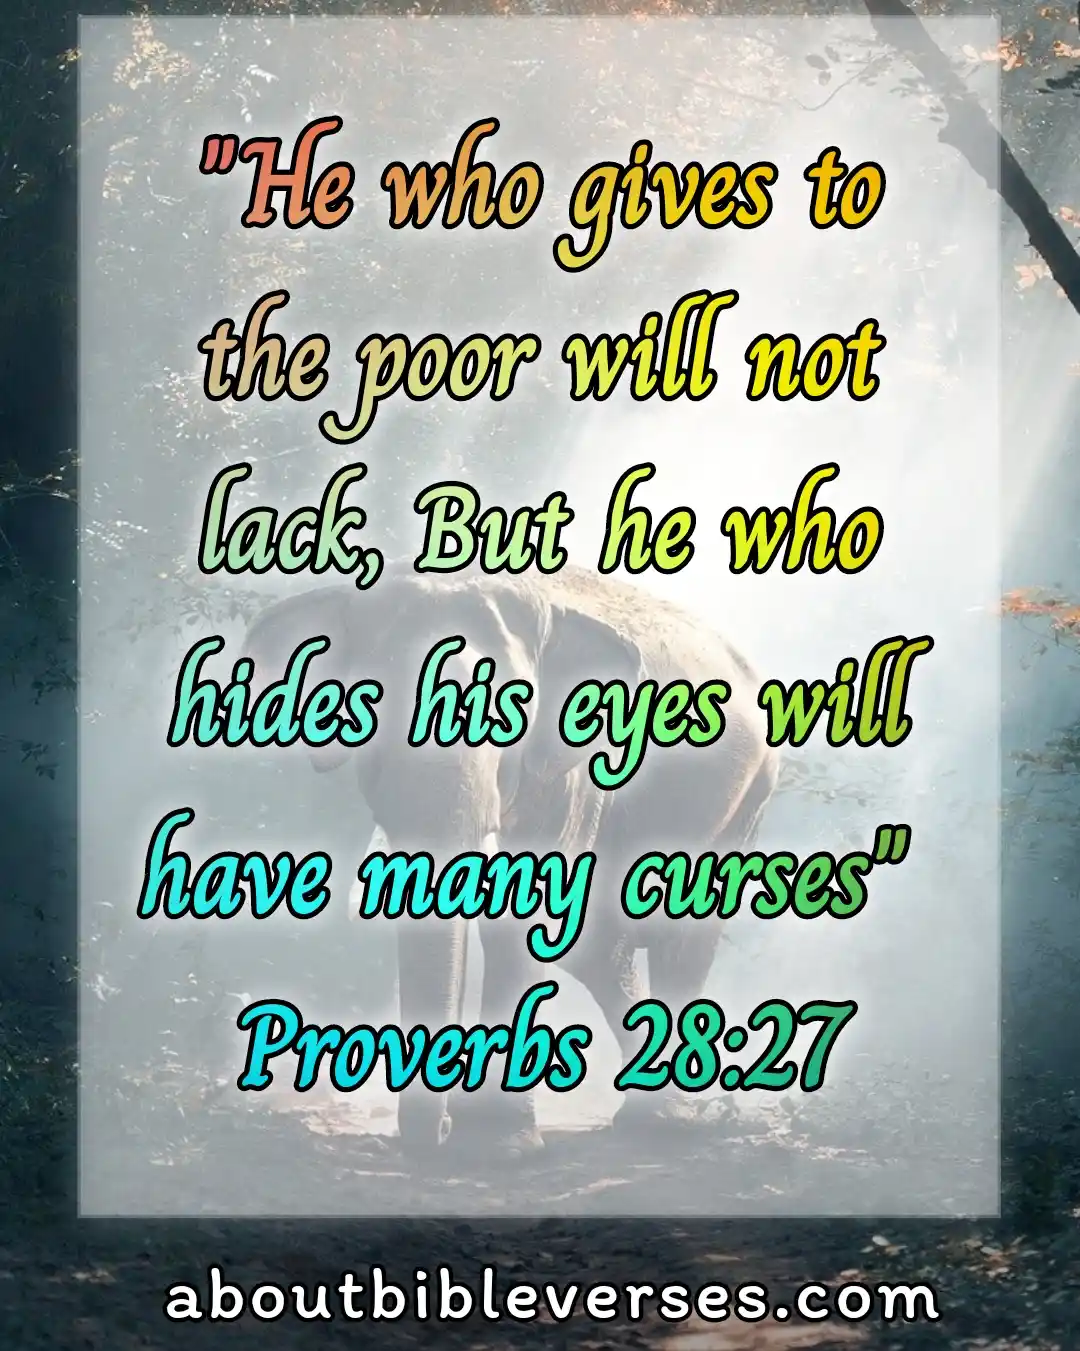 Bible Verses About Generosity (Proverbs 28:27)